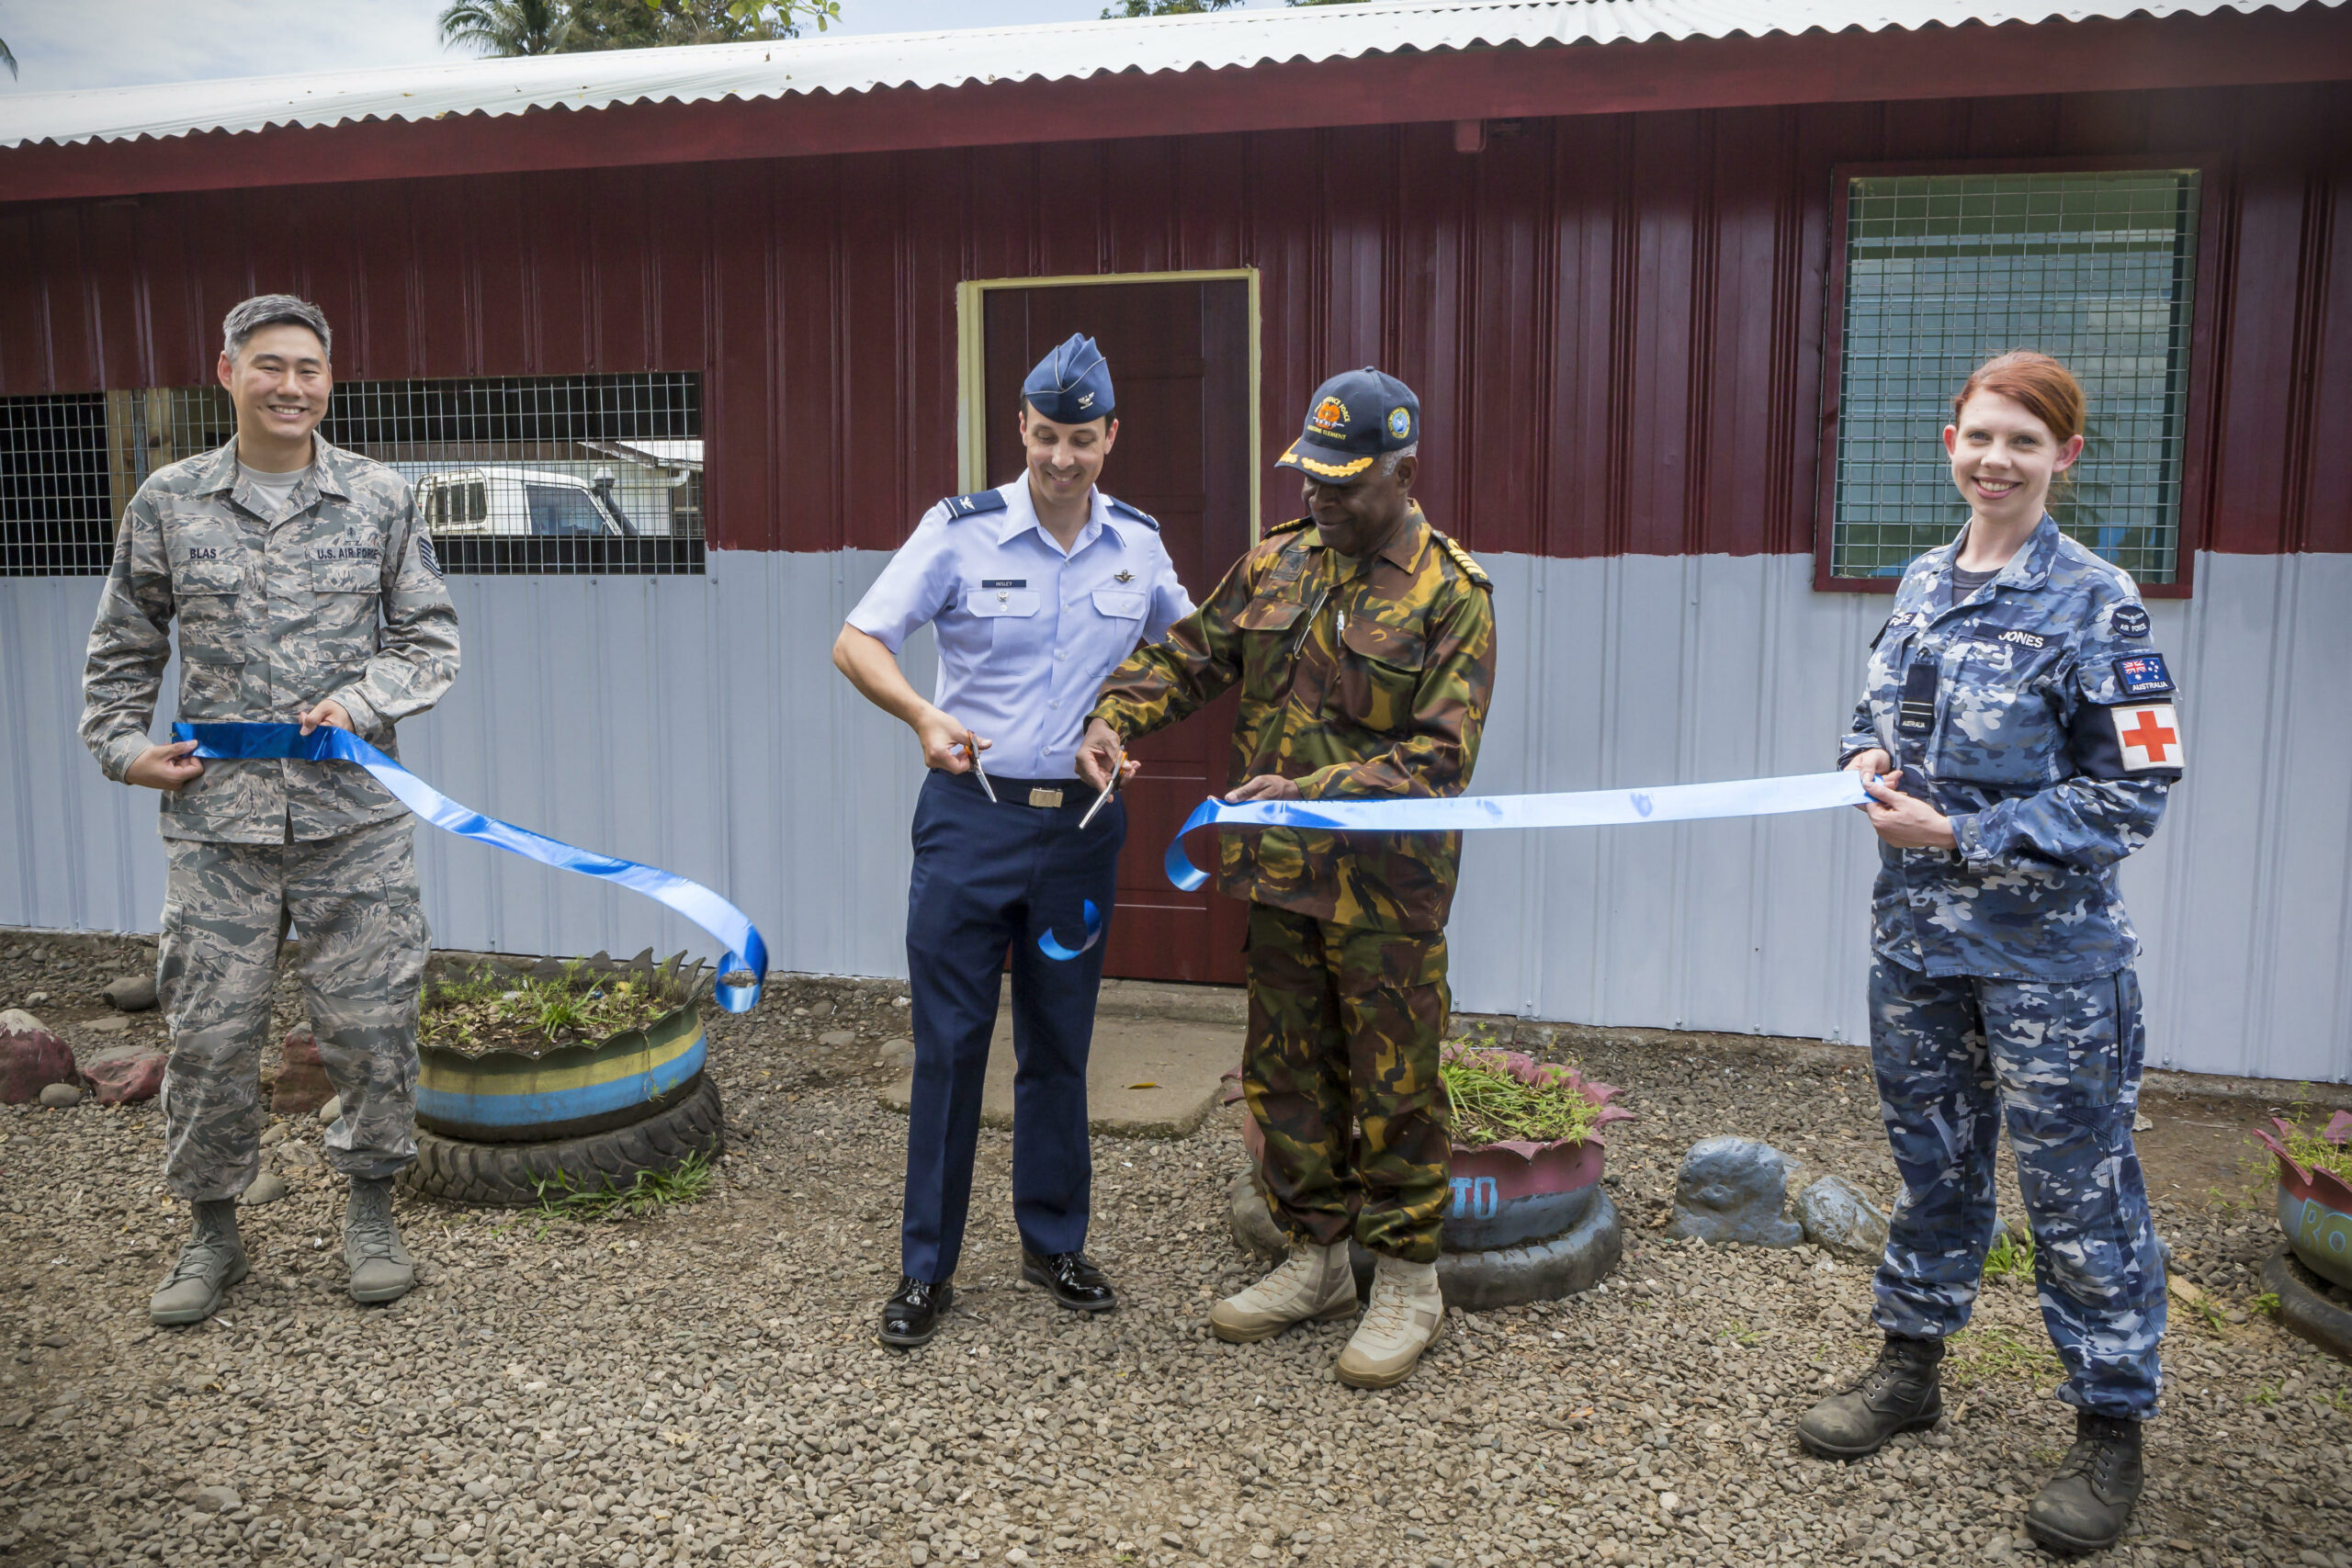 FLTLT Jones (far right) with United States Pacific Air Forces Colonel Darryl Insley and Papua New Guinea Defence Force Chief of Staff Captain Philip Polewara in September 2019 at the opening of a new classroom at Bowali Primary School in Lae, Papua New Guinea. The building had been used as a makeshift pharmacy the previous week as part of Exercise Pacific Angel.